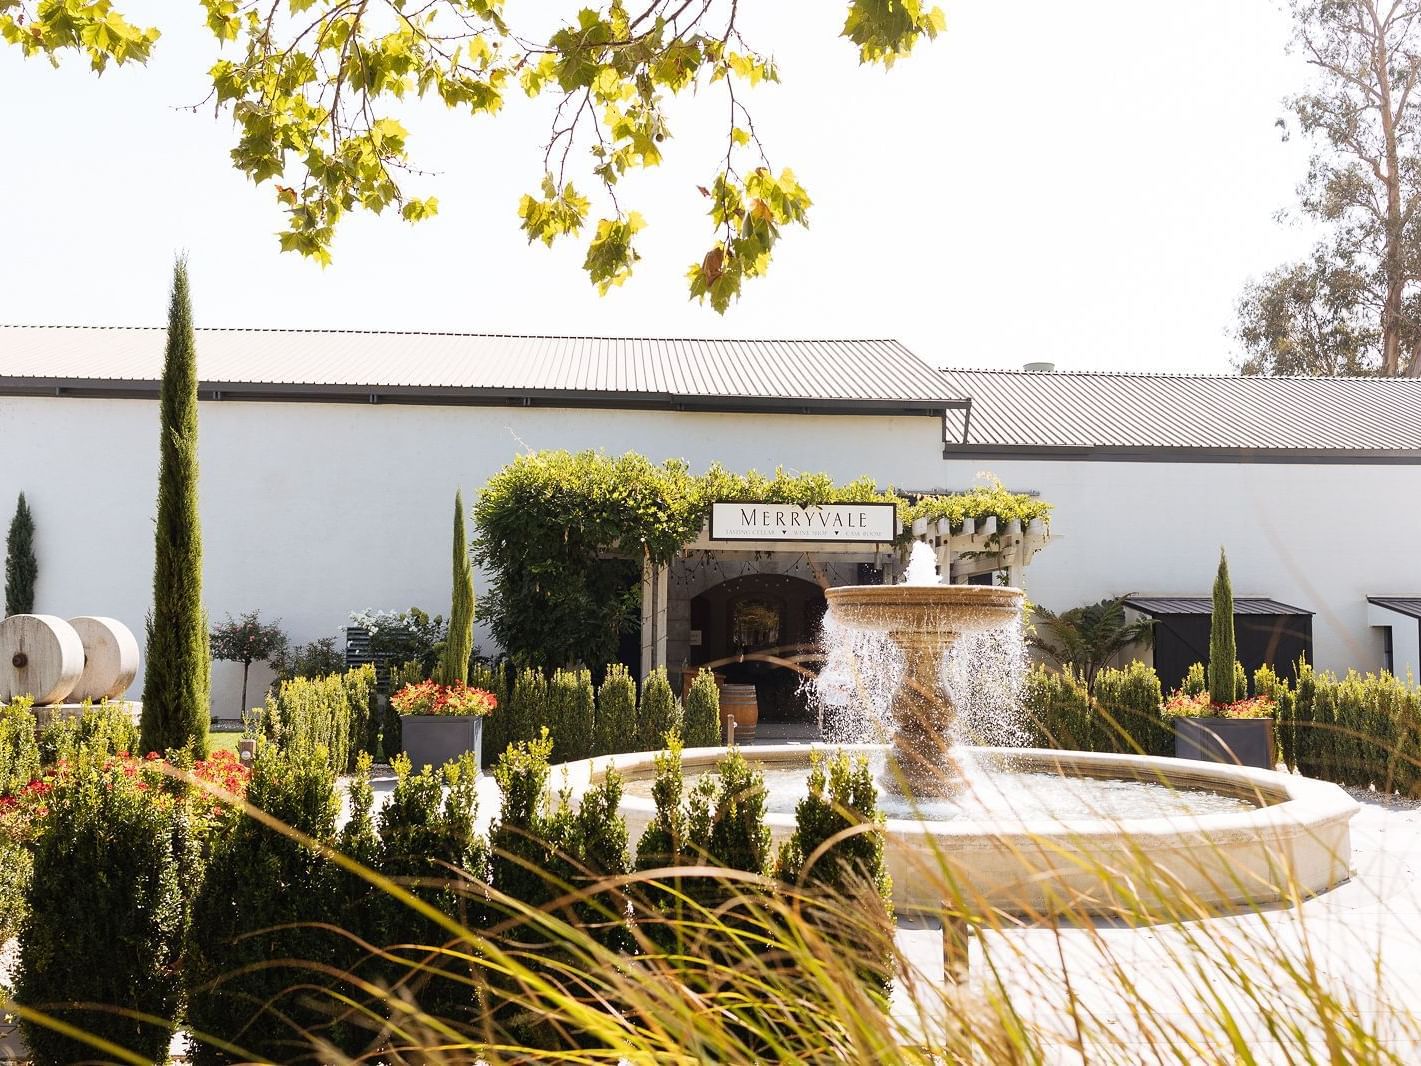 Merryvale Vineyards fountain and entrance